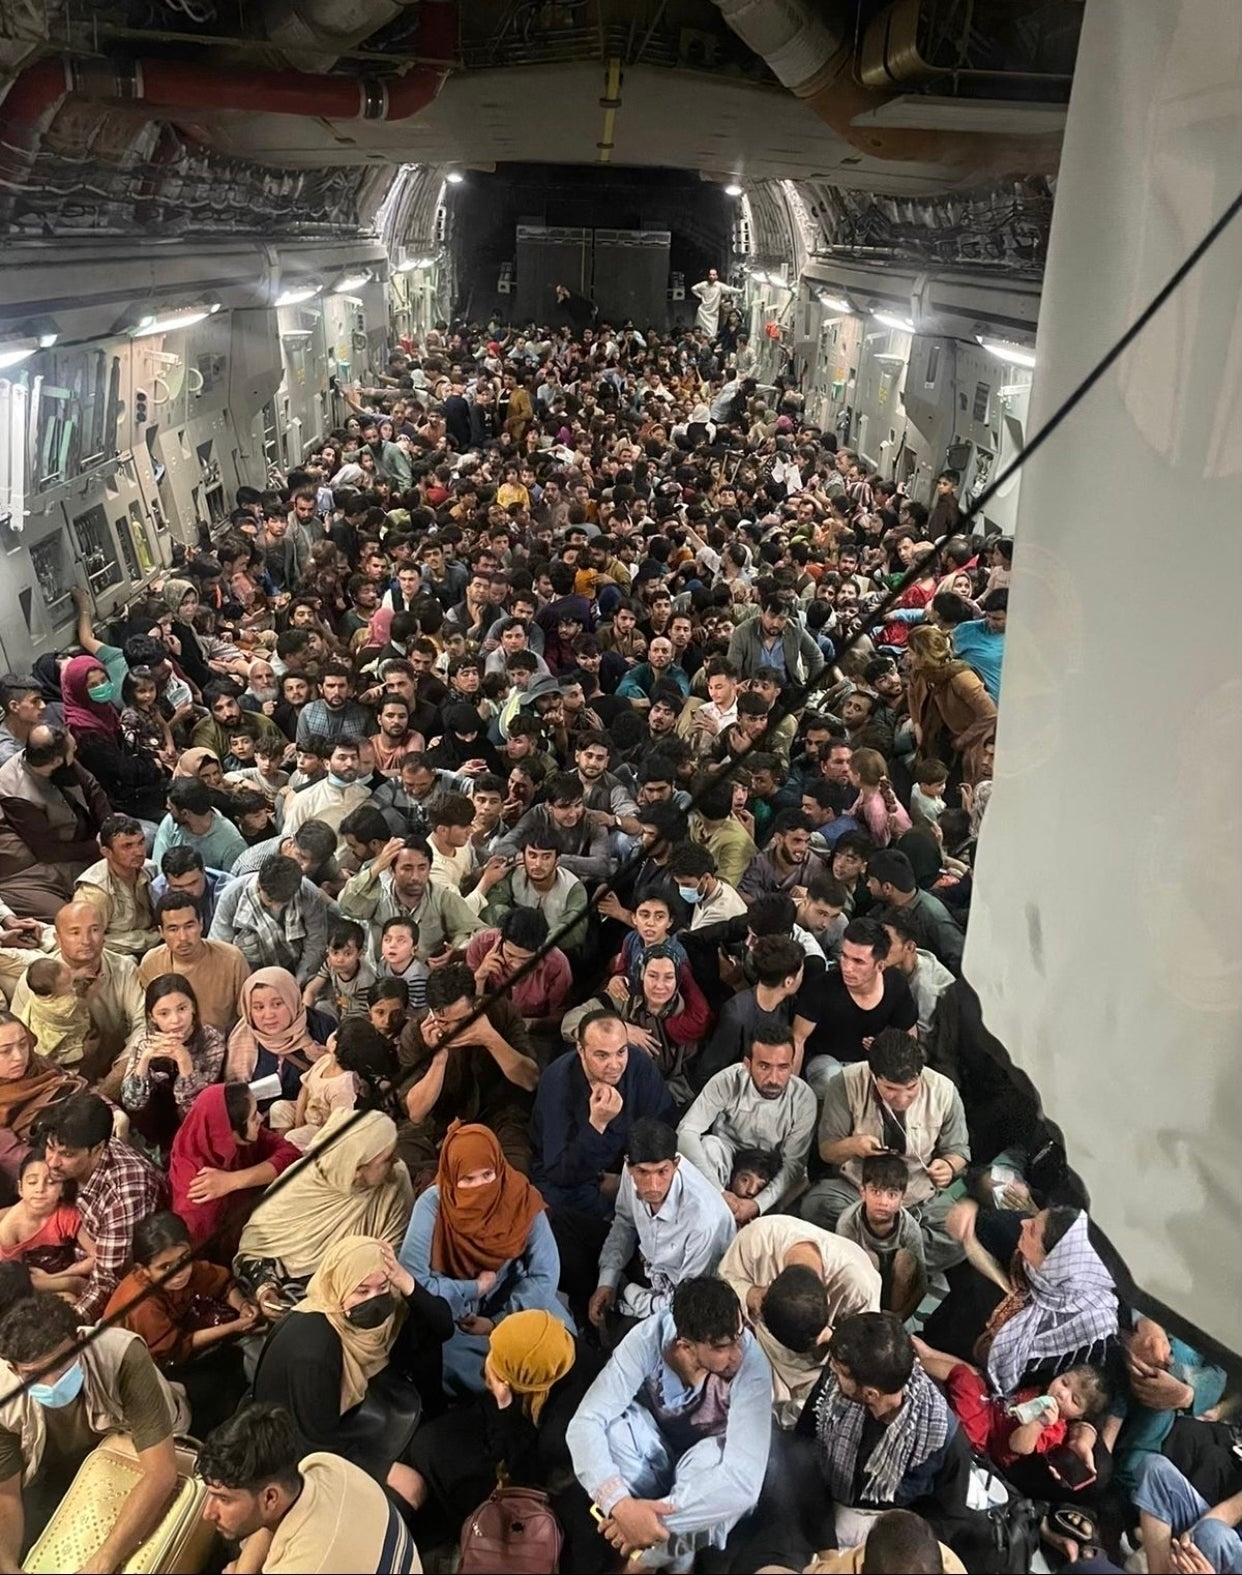 Image is thought to show almost 700 people rammed into a C-17 Globemaster III